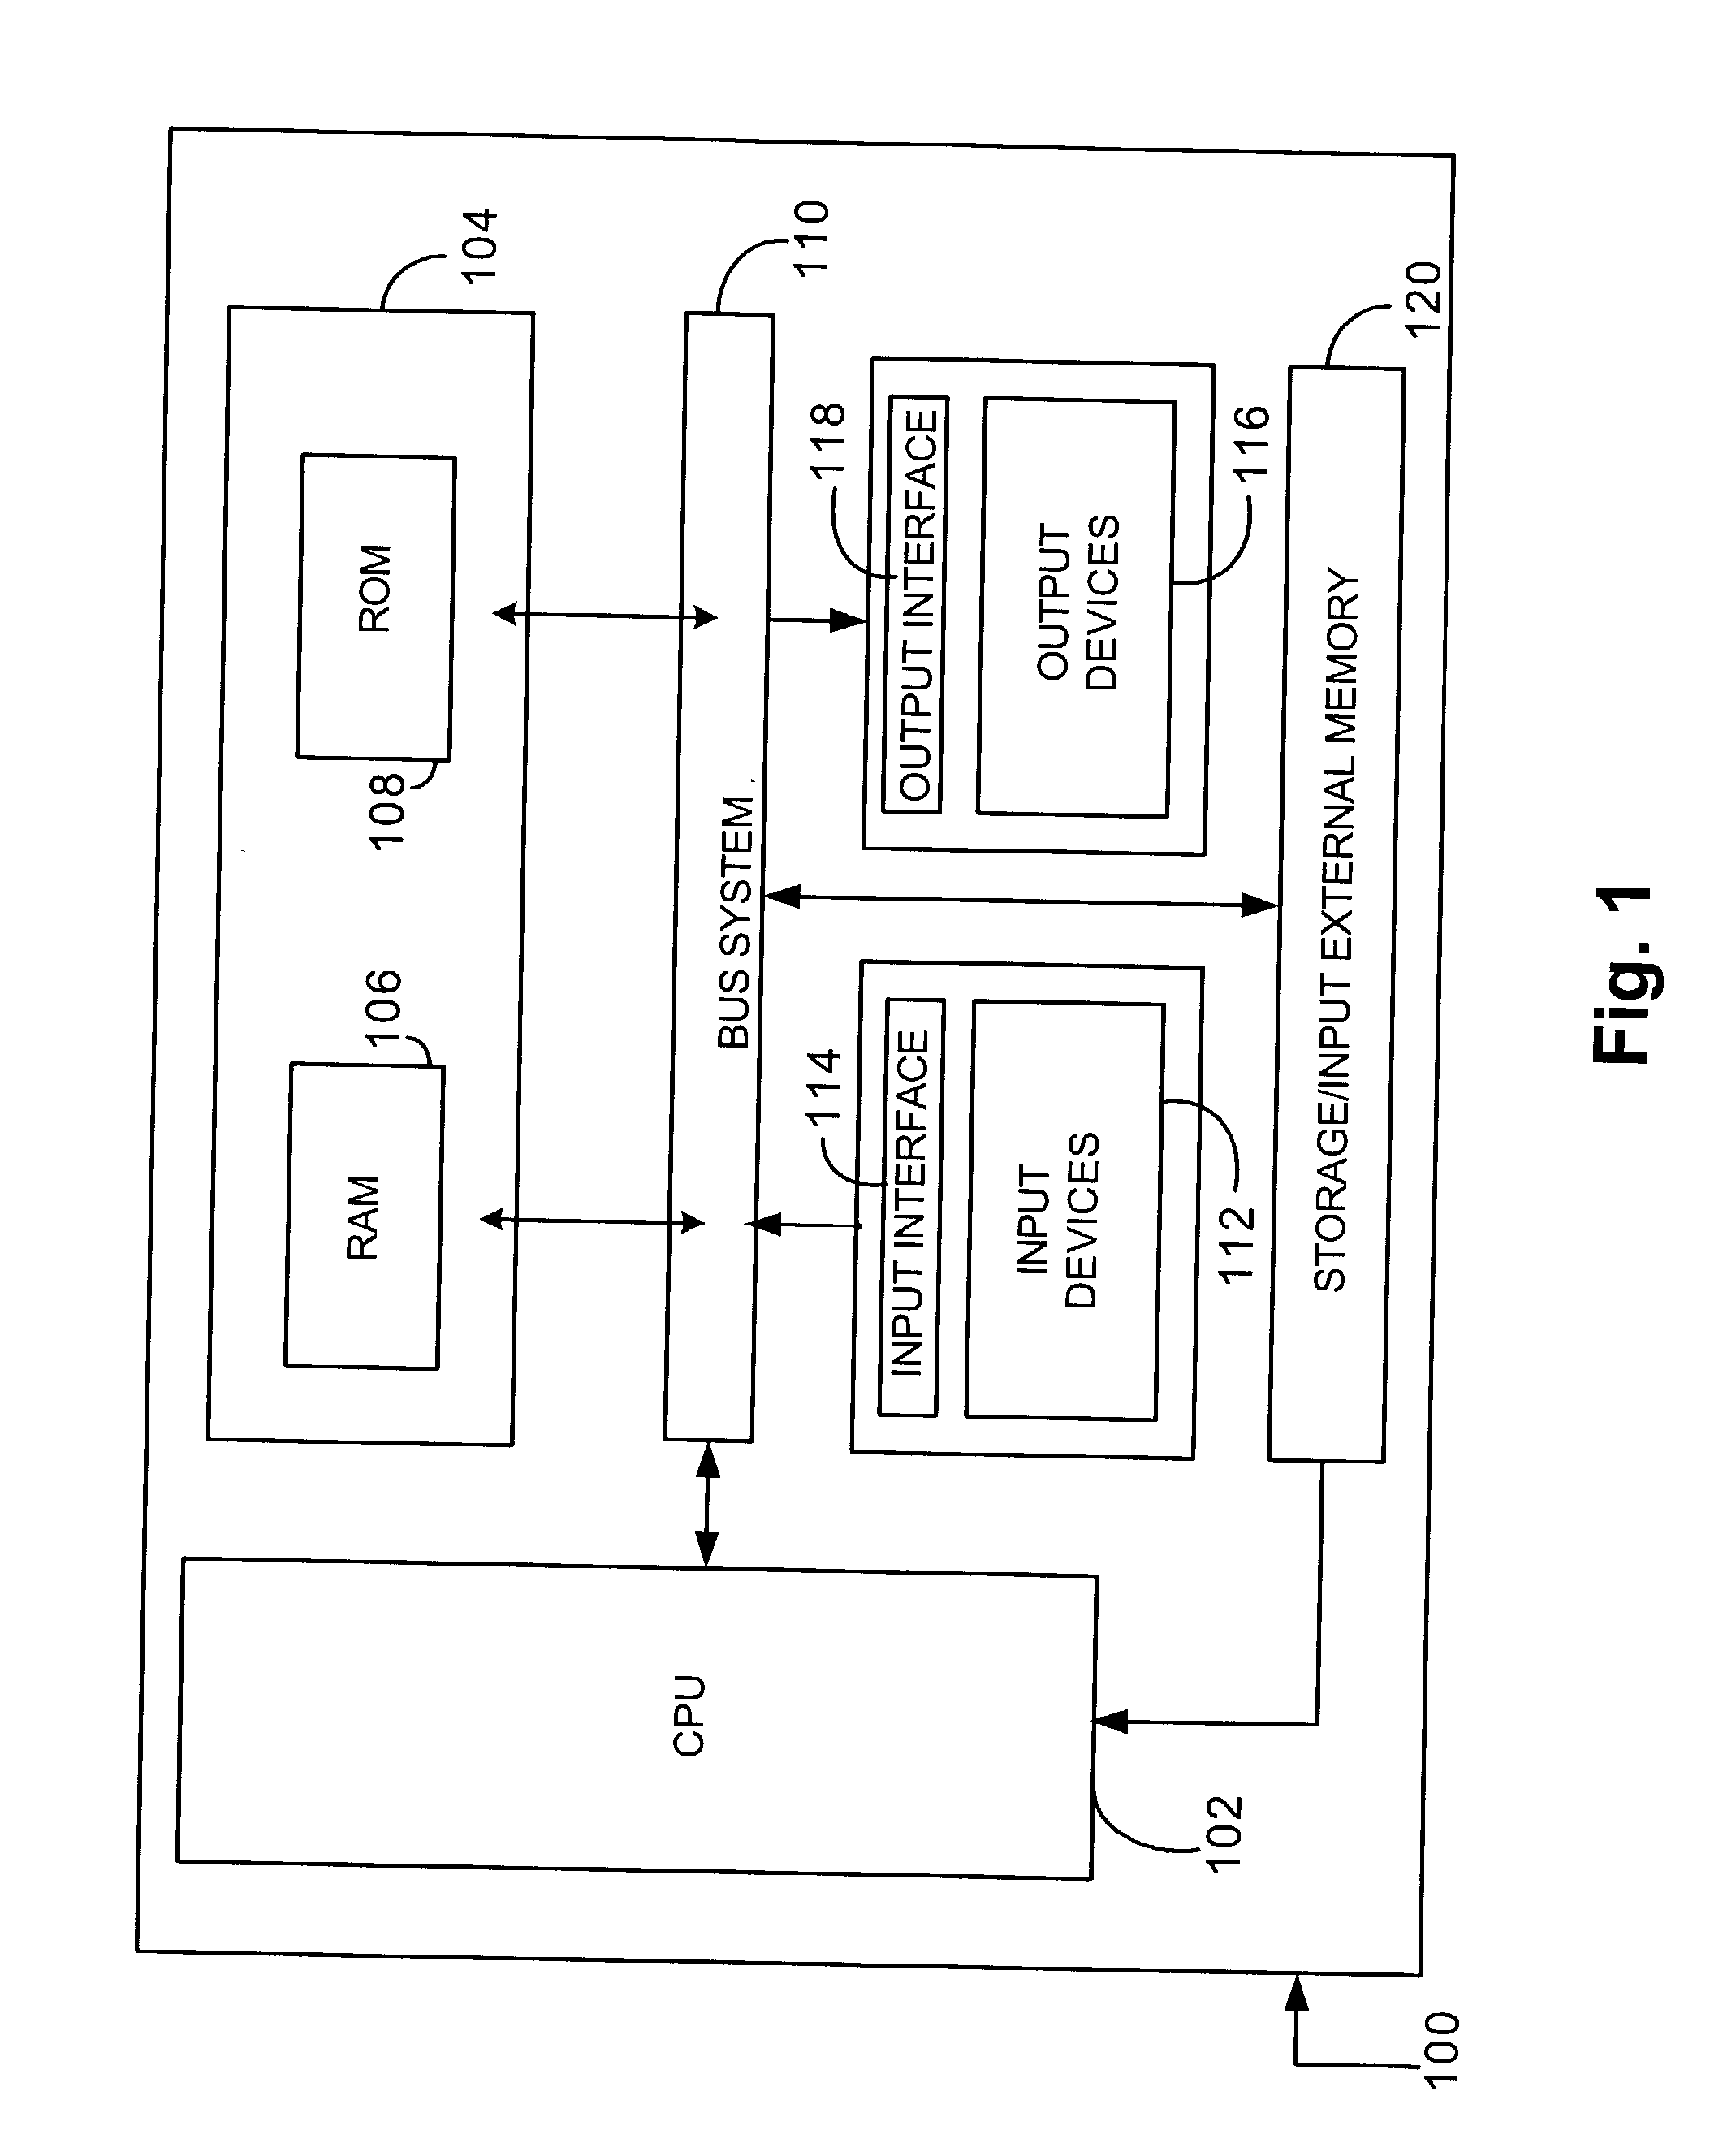 Network incident analyzer method and apparatus